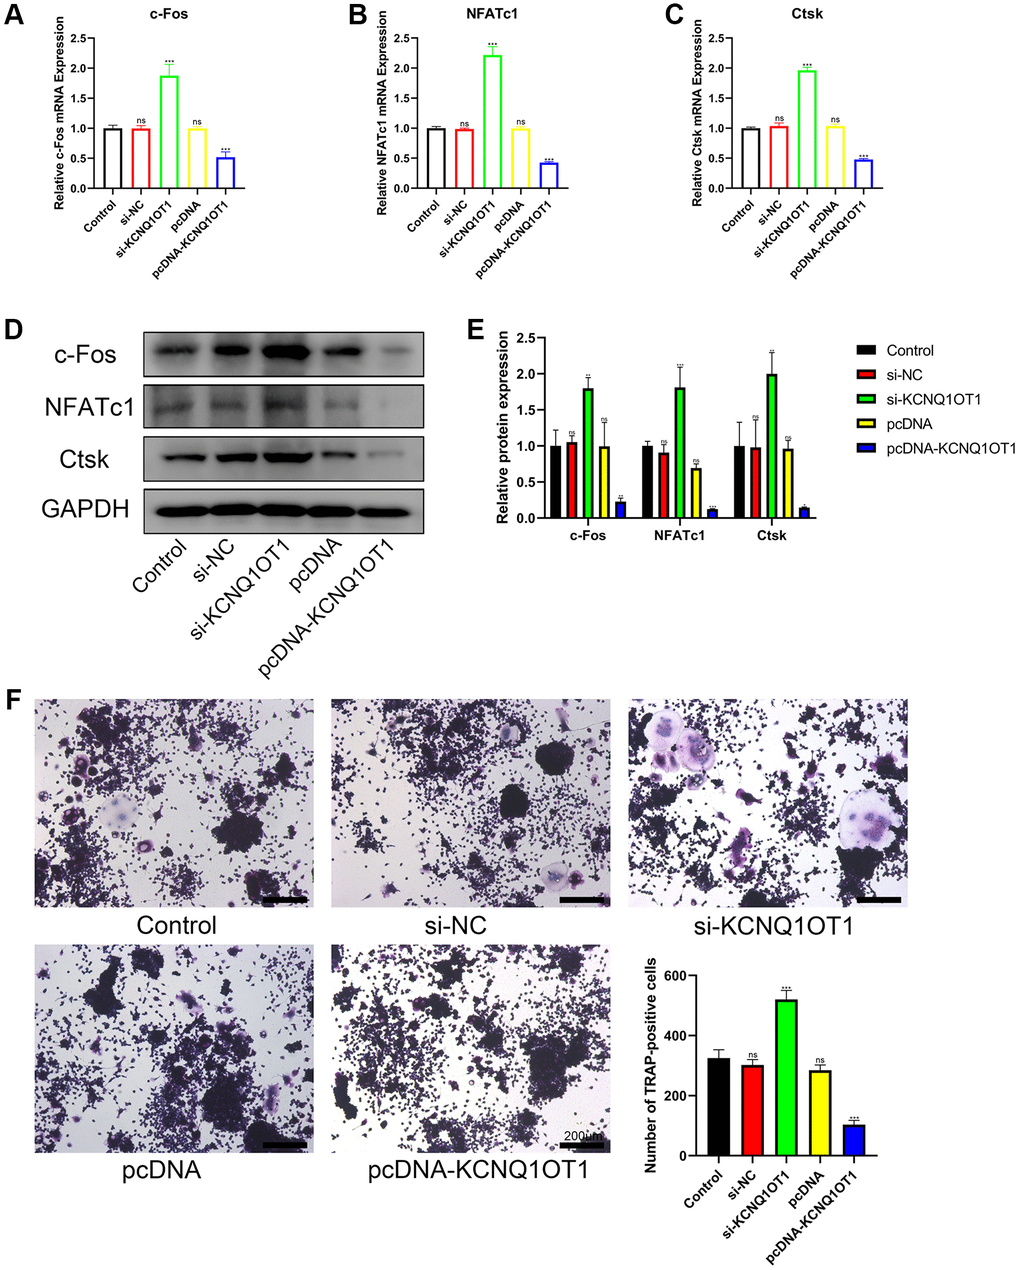 KCNQ1OT1 inhibits the osteoclast differentiation of RAW 264.7 cells. (A–E) RAW 264.7 cells transfected with pcDNA-KCNQ1OT1, si-KCNQ1OT1, or corresponding control vectors and treated with RANKL for 5 days, the mRNA and protein levels of the osteoclastogenesis markers c-Fos, NFATc1, and Ctsk were measured by qRT-PCR and Western blotting. (F) A Tartrate-resistant acid phosphatase (TRAP) staining kit was used for osteoclast staining, and TRAP-positive multinucleated cells were counted (Scale bar: 200 μm). *P **P ***P 